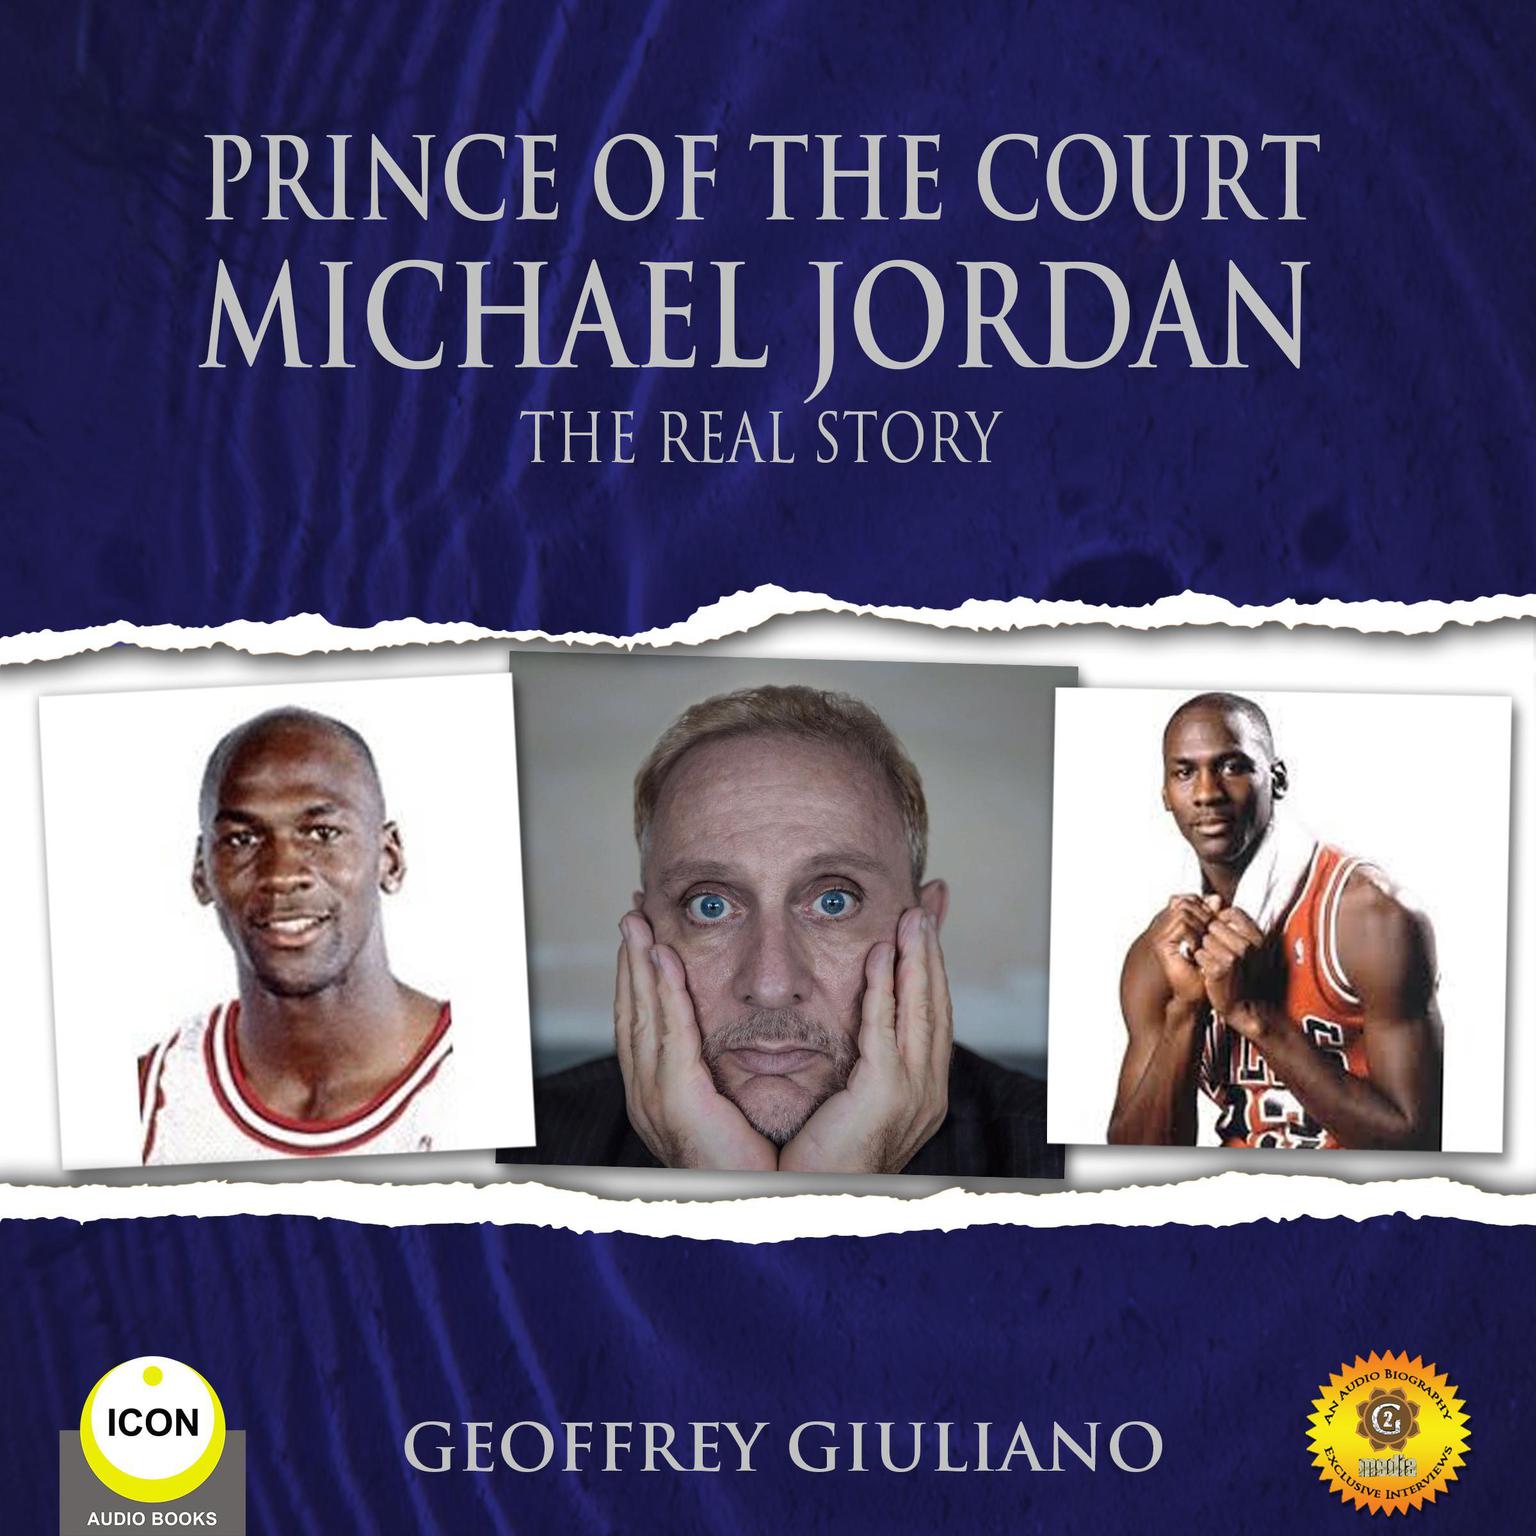 Prince of the Court Michael Jordan - The Real Story Audiobook, by Geoffrey Giuliano